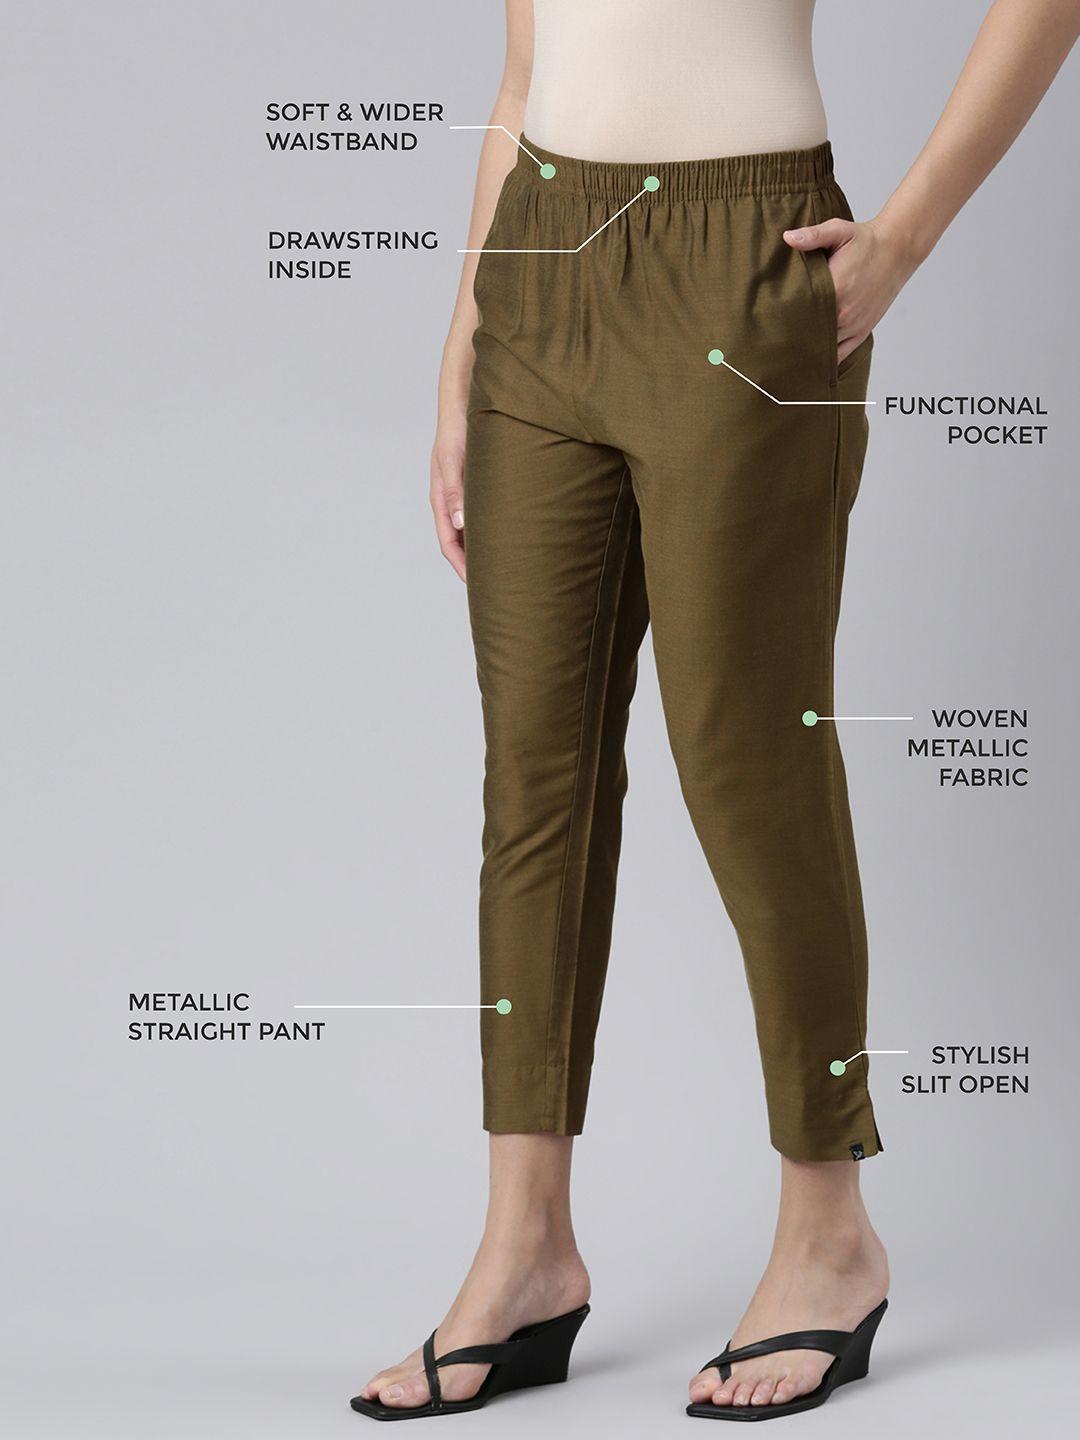 twin birds women mid-rise shimmer solid functional pockets straight trousers